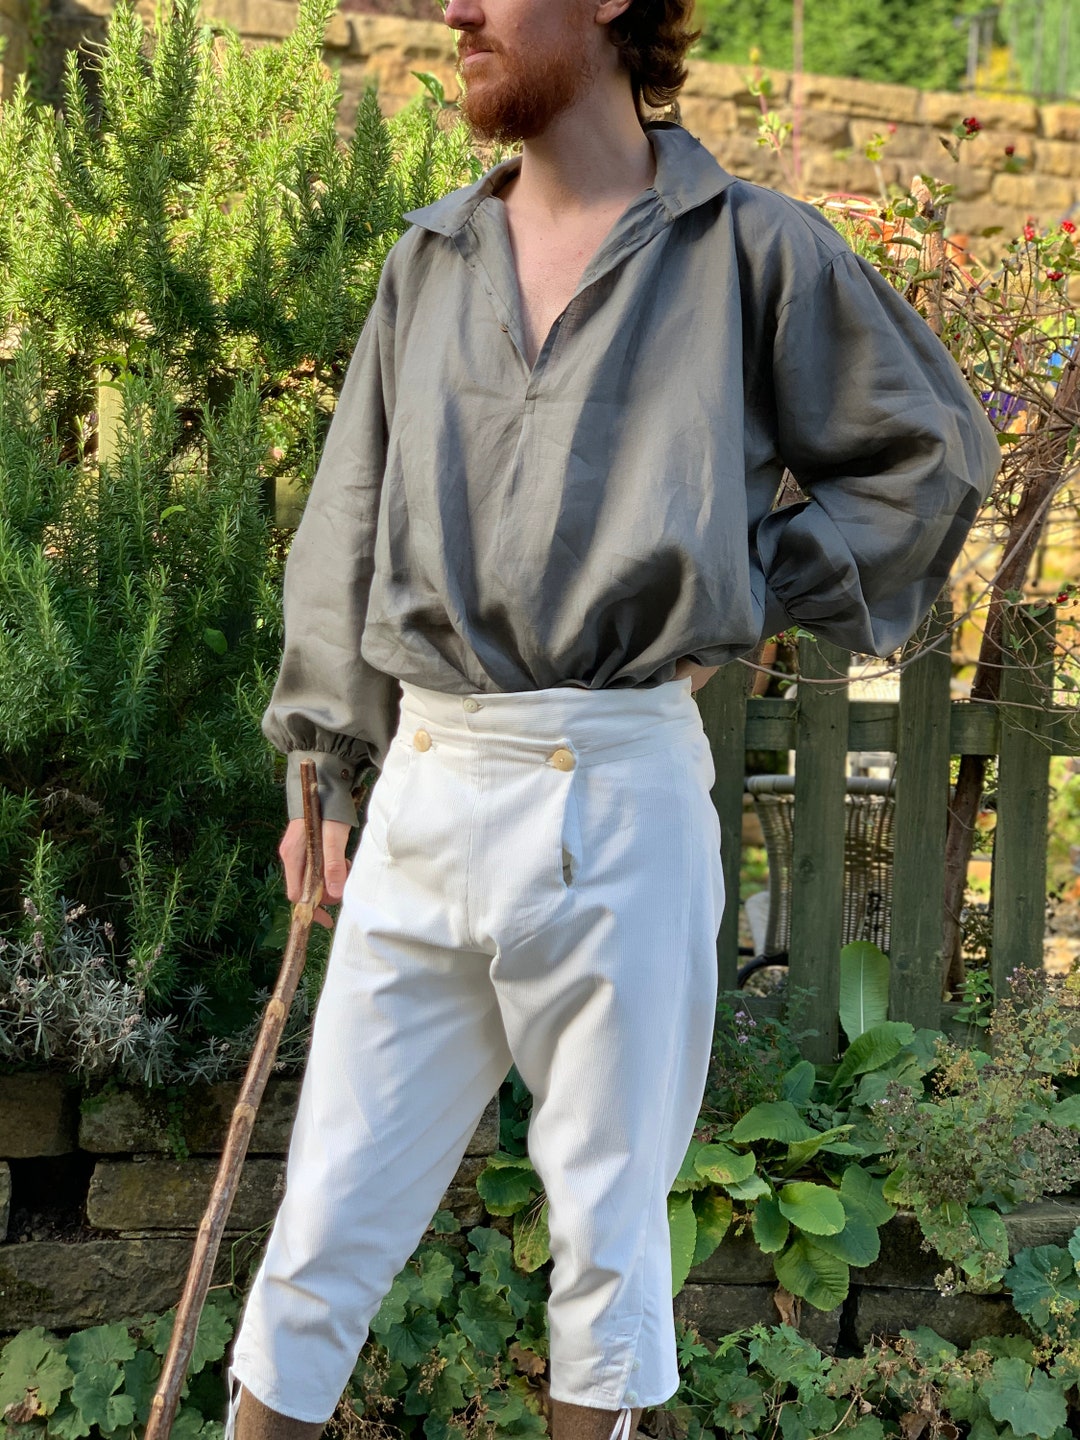 Men's Breeches in Undyed Cotton Corduroy Fall-front Style - Etsy